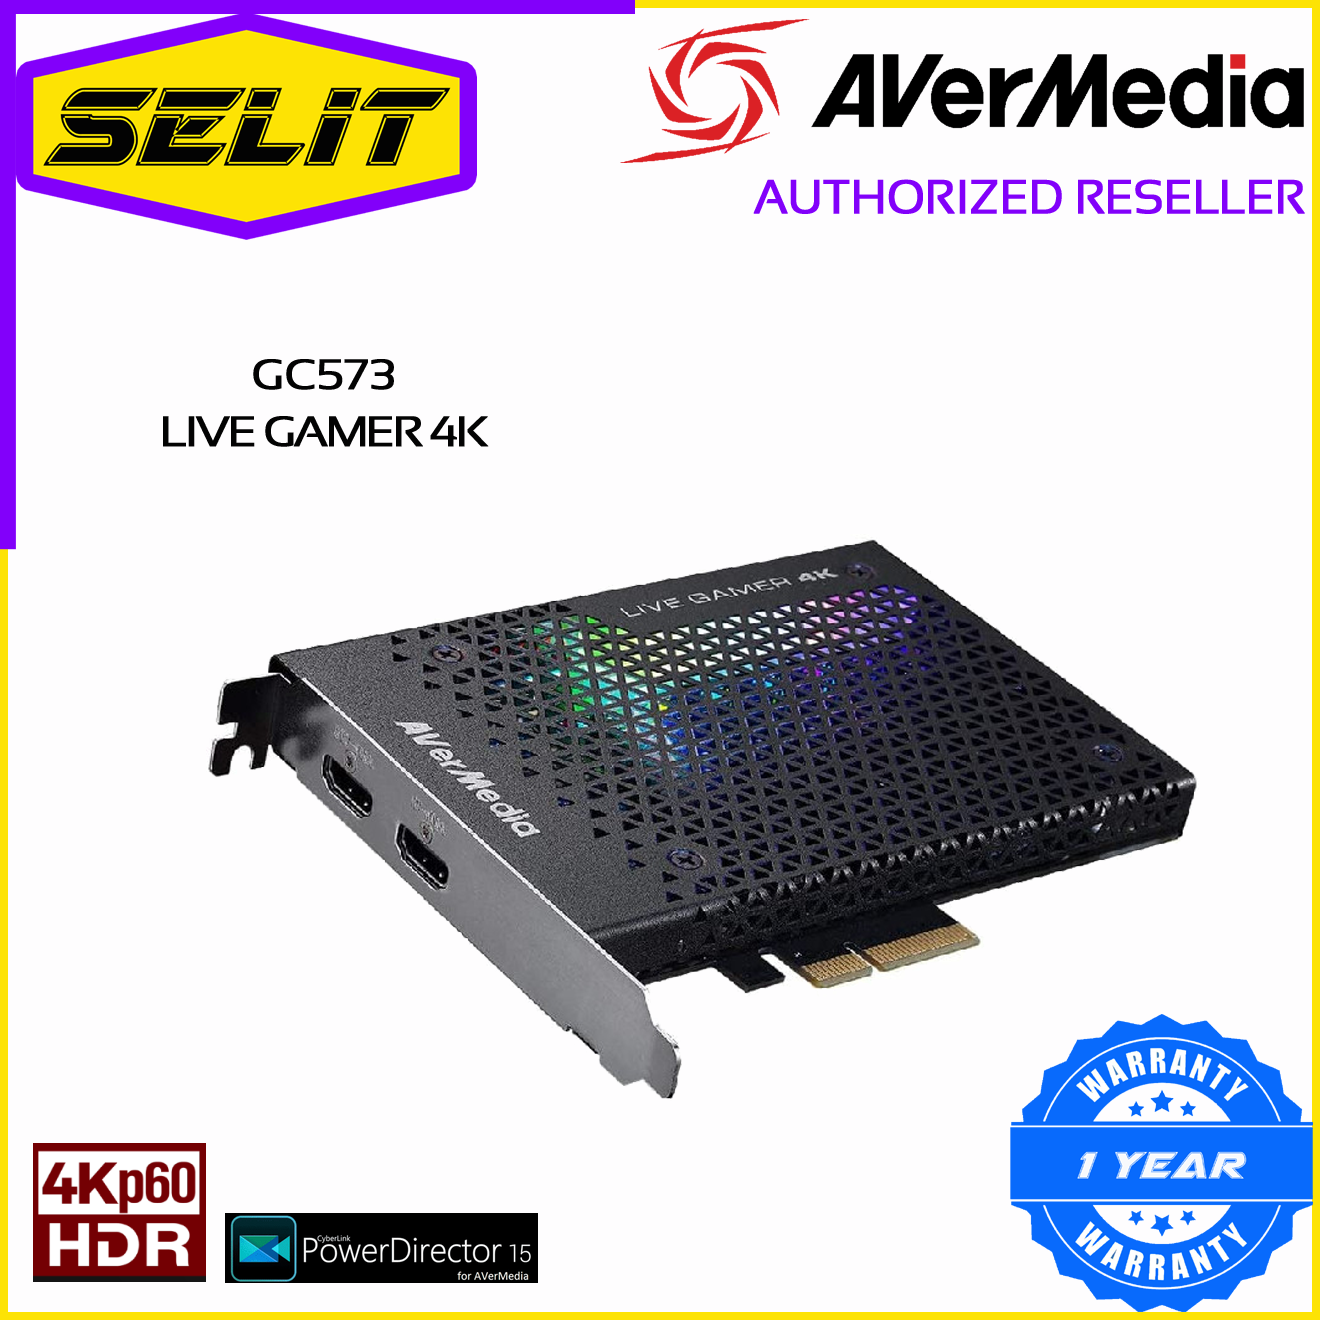 AVerMedia Live Gamer 4K GC573 - video capture adapter - PCIe 2.0 x4 - GC573  - Streaming Devices 